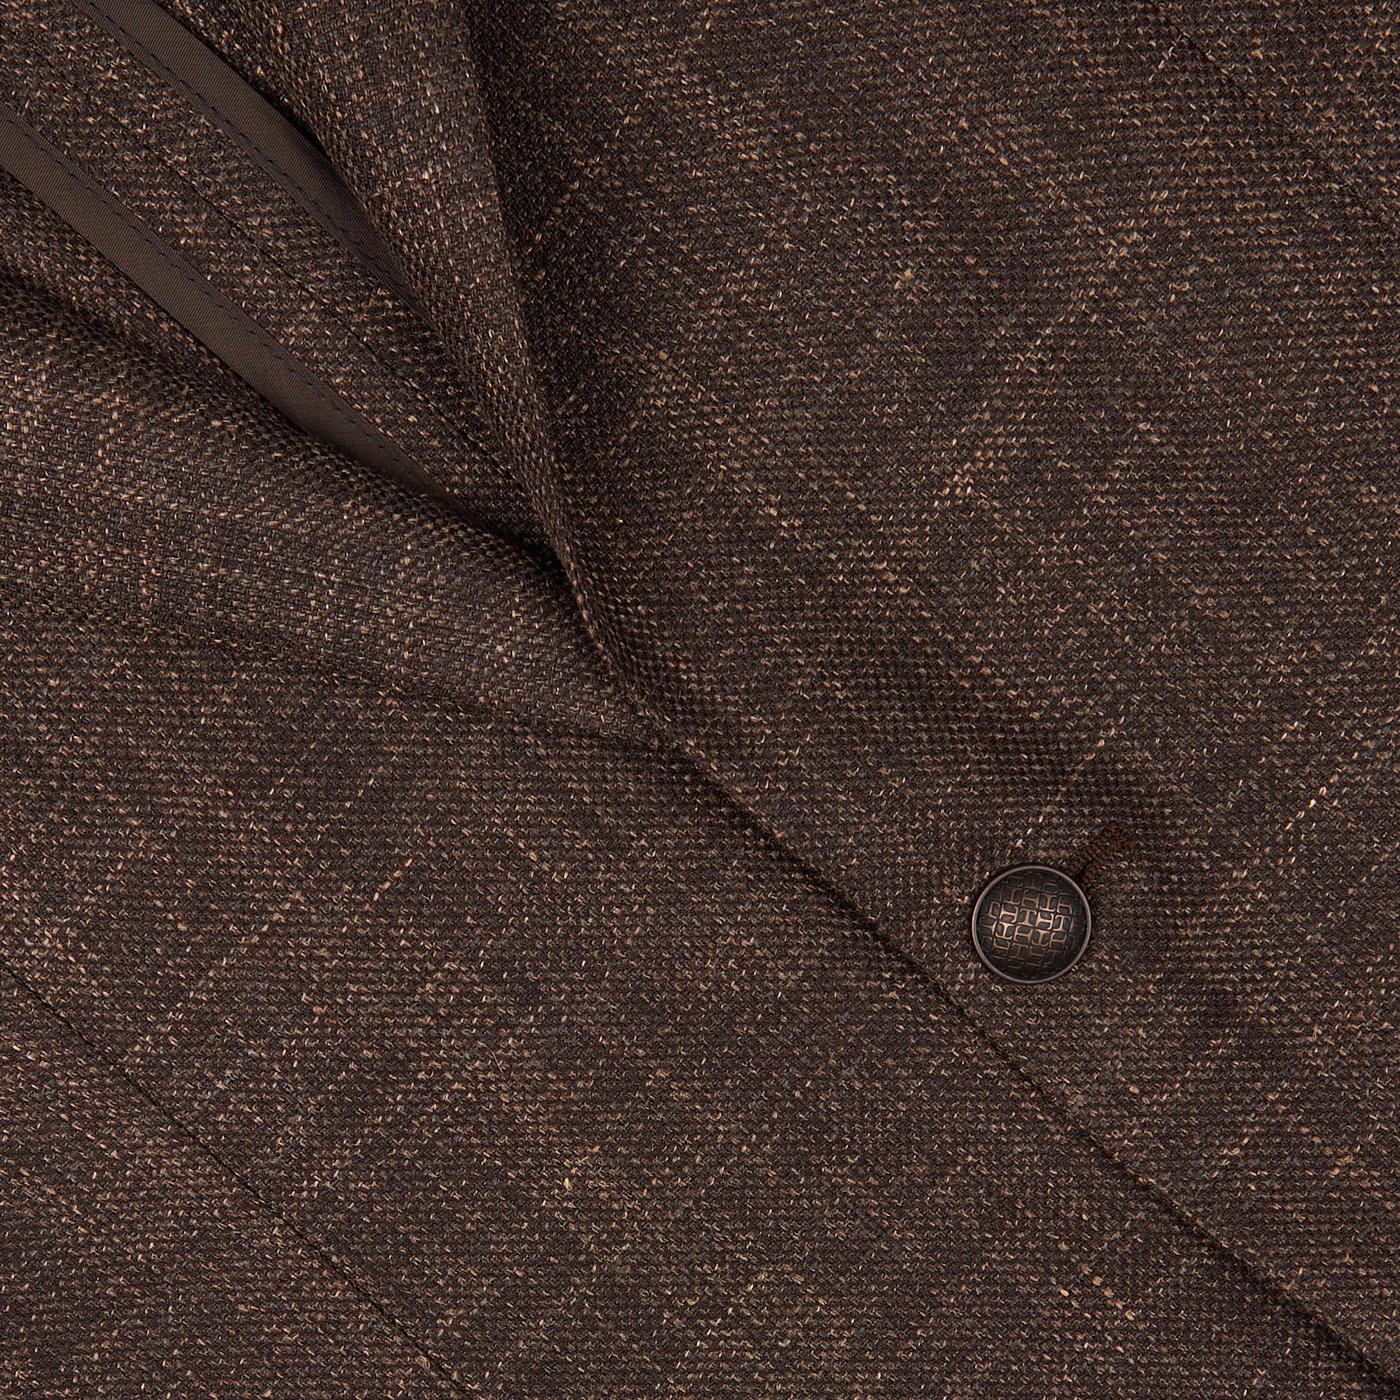 Close-up view of a textured fabric with a button on a Tagliatore Dark Brown Melange Wool Linen Silk Blazer, likely part of the Vesuvio model garment.